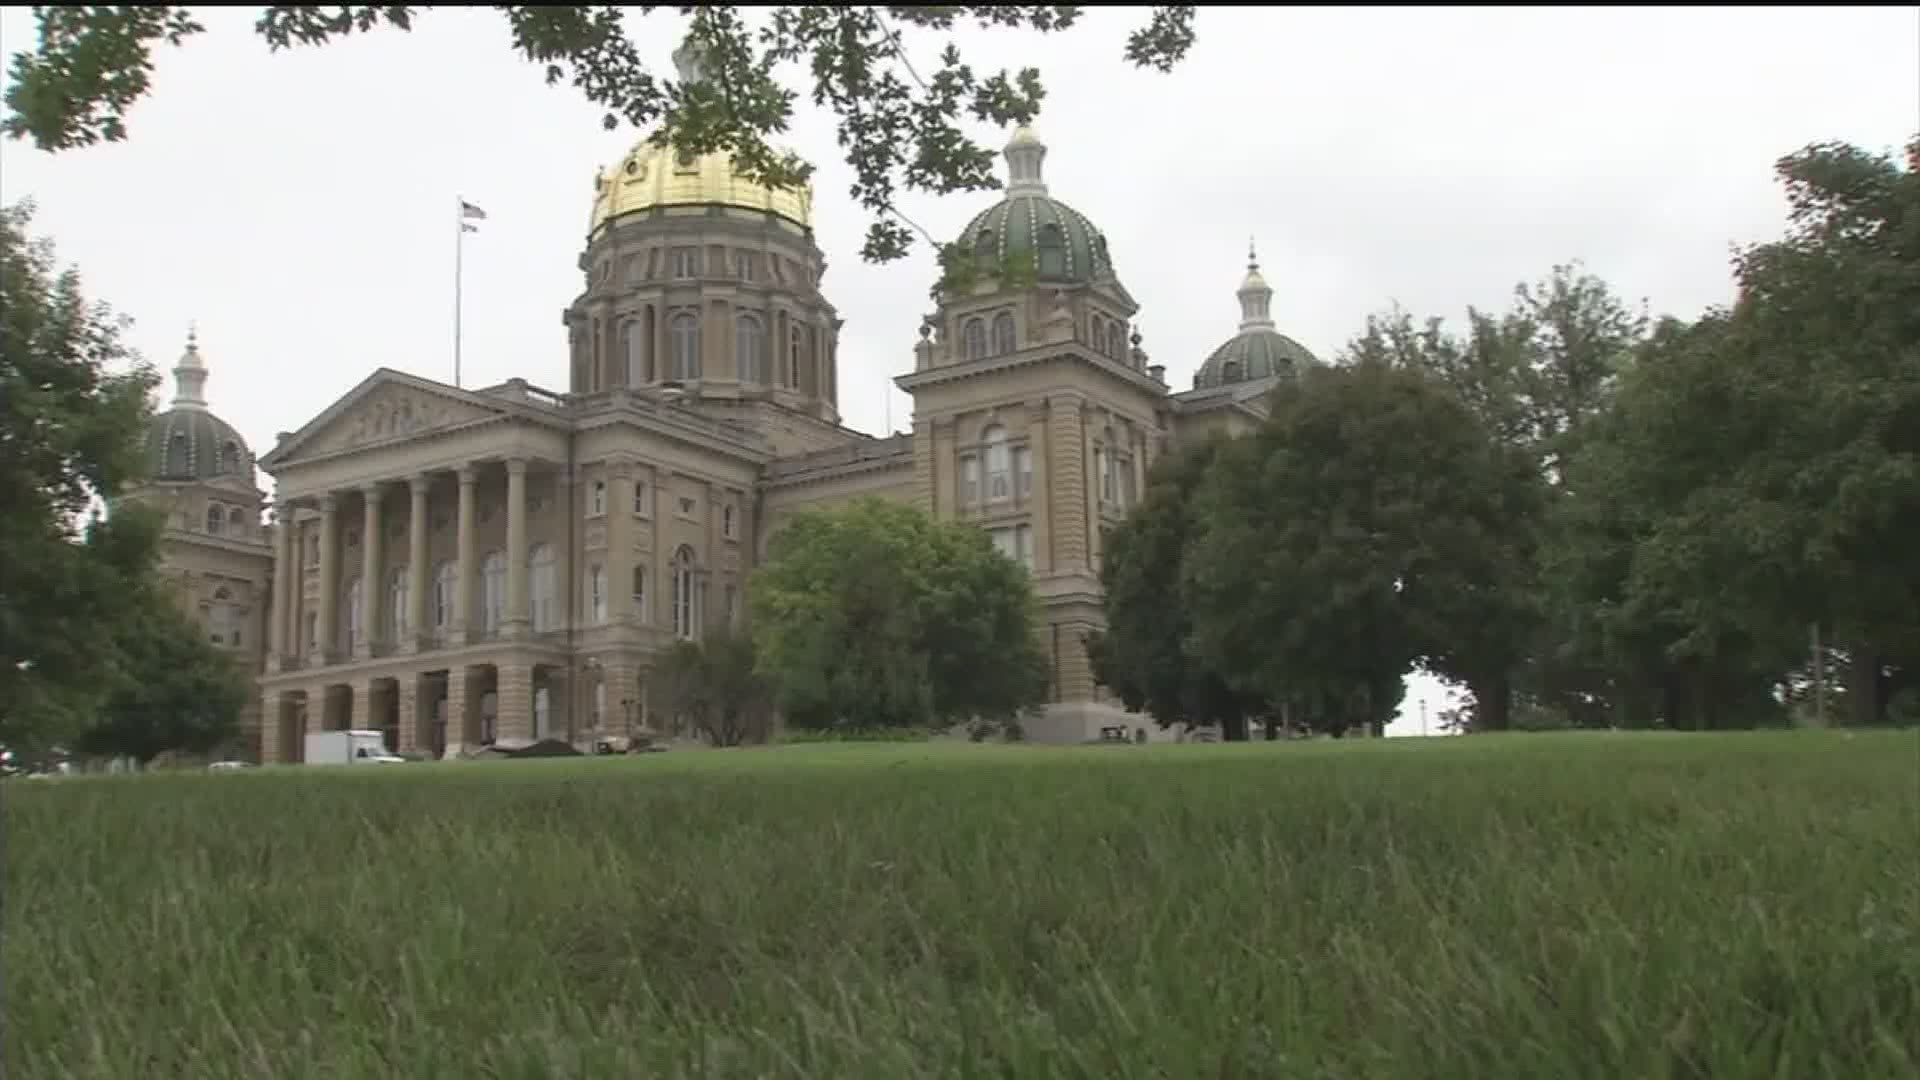 A bill is making its way through the Iowa legislative process that may place harsher restrictions on the voting rights of felons.